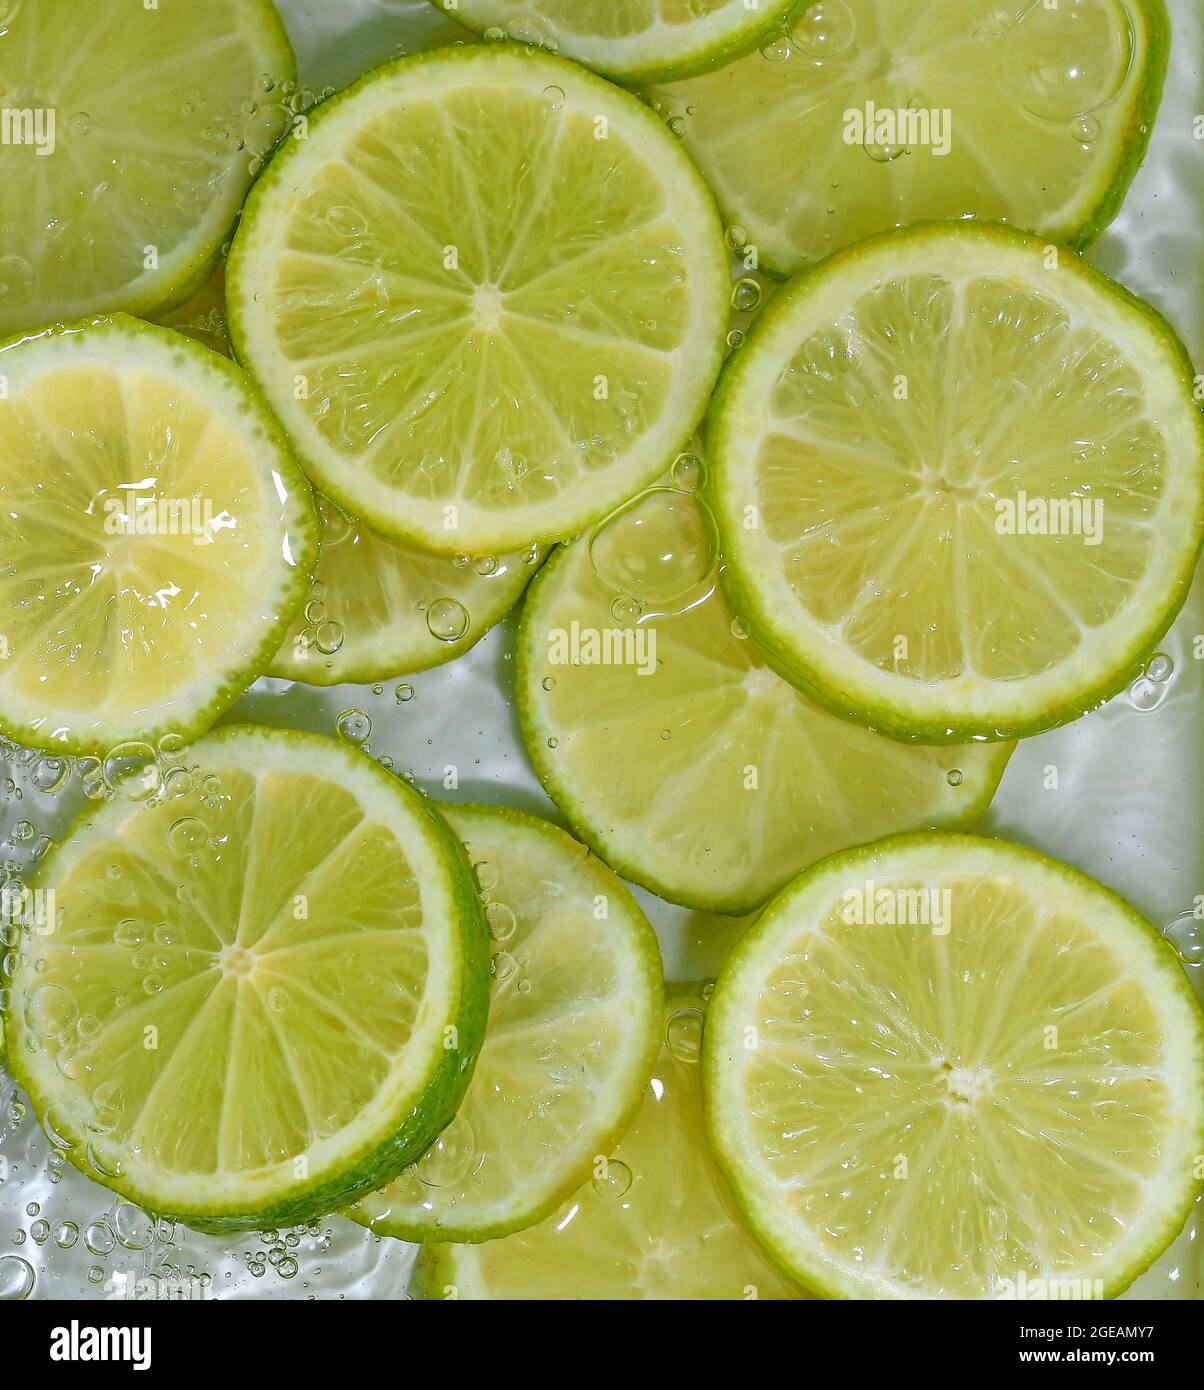 Close-up fresh slices of green limes on white background. Slices of limes in sparkling water on white background, closeup. Citrus soda Stock Photo